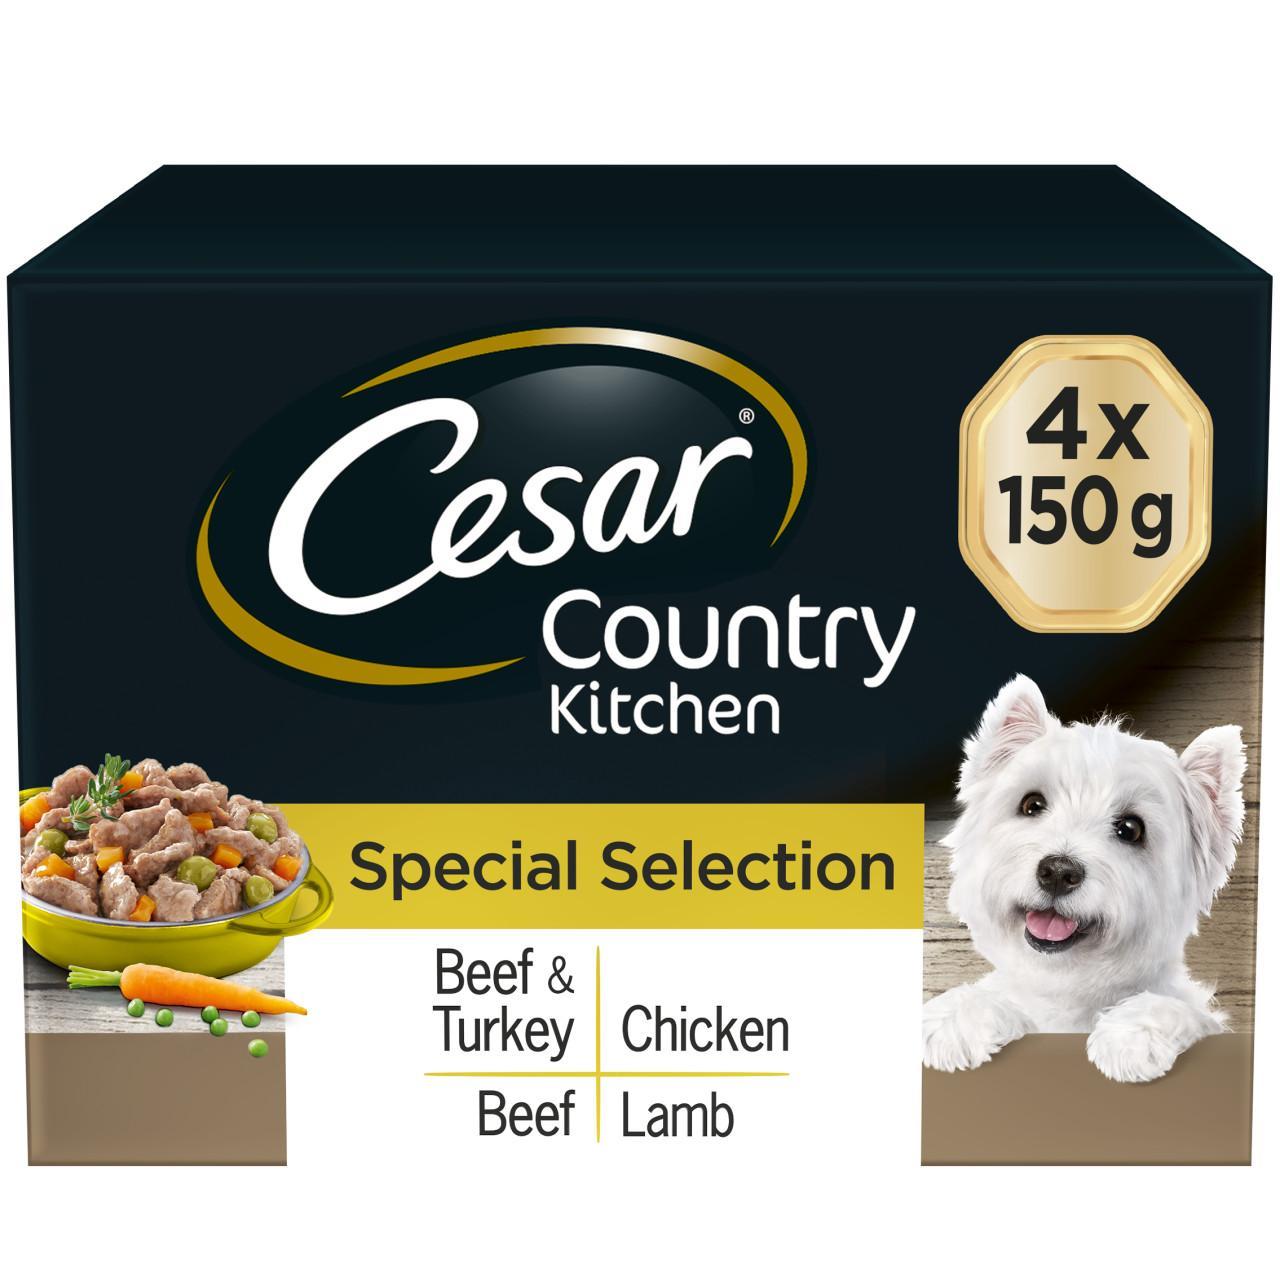 An image of Cesar Country Kitchen Meat in Gravy